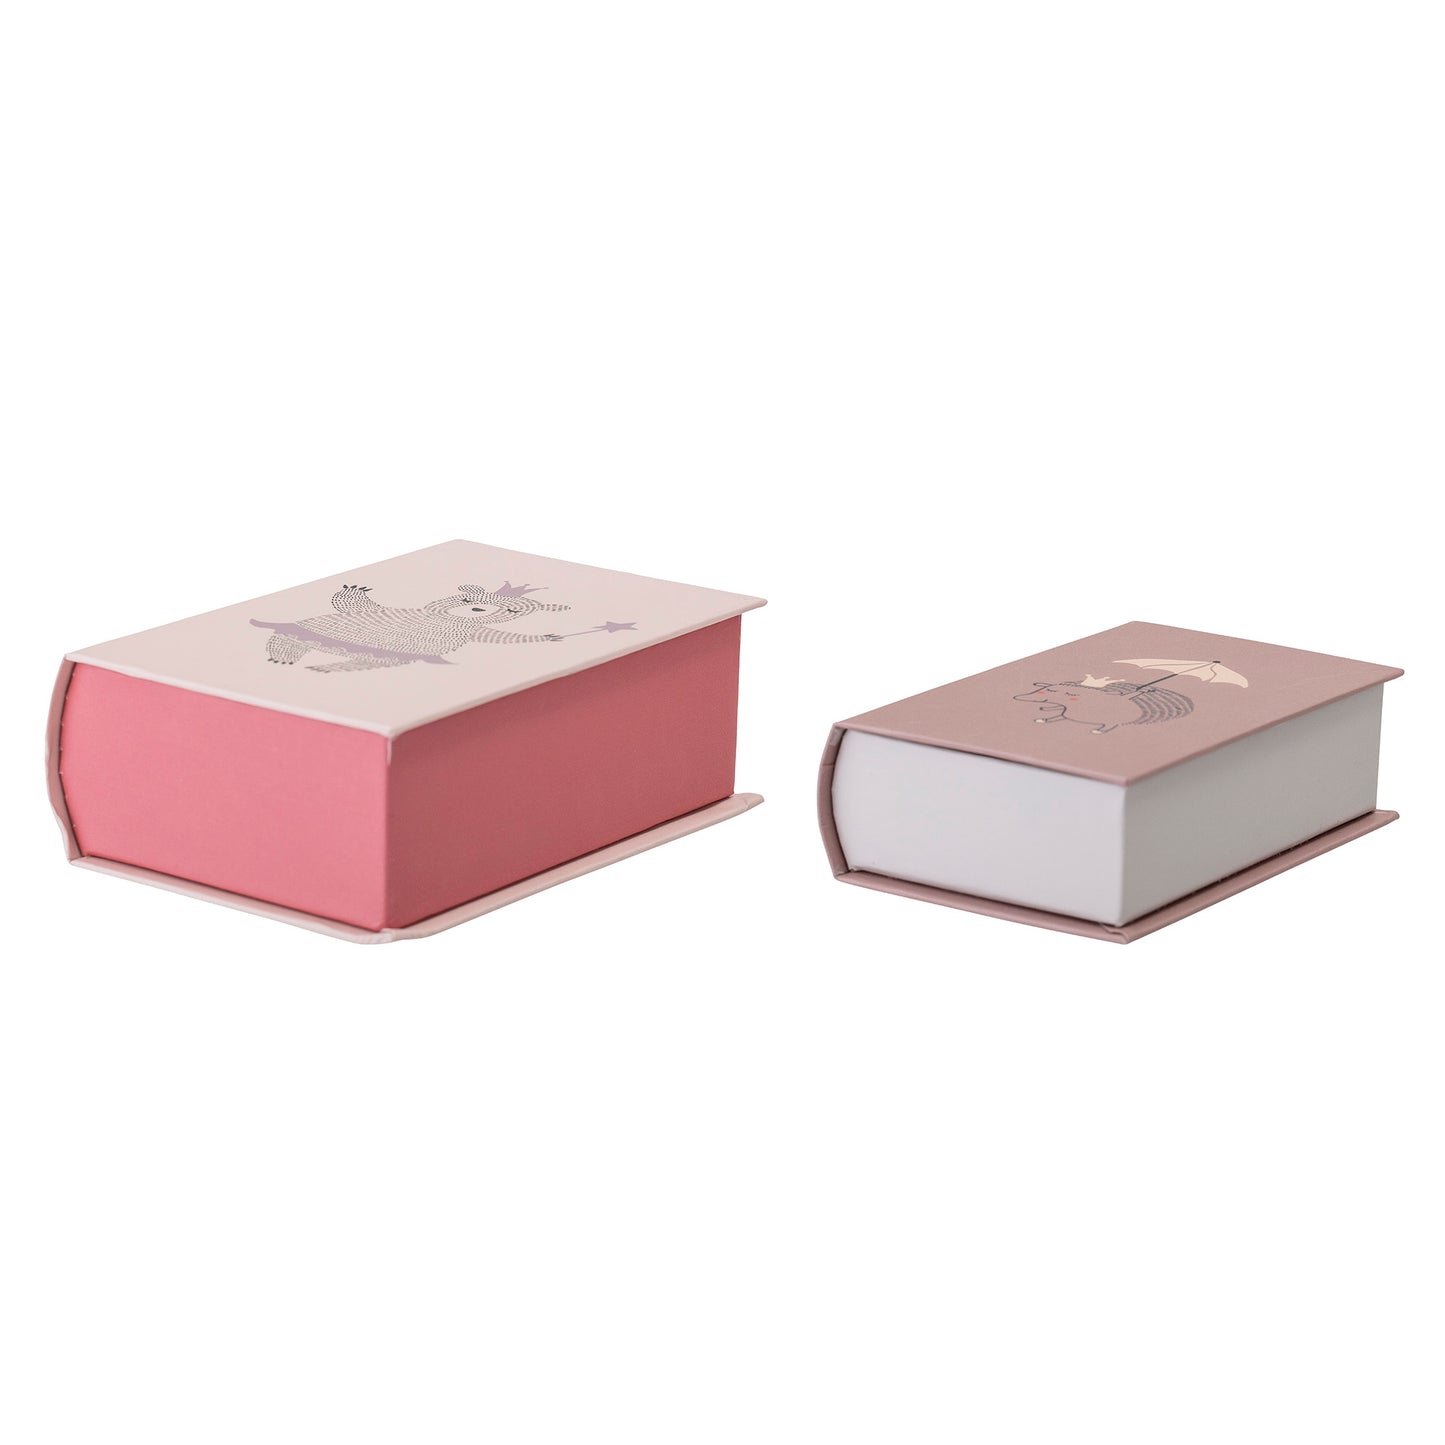 Pink and cream little storage boxes that look like a book. Perfect for hiding little treasures.Dimensions:L14xH4,5xW9/L16xH6xW11 cm, Set of 2  Material: cardboard and paper